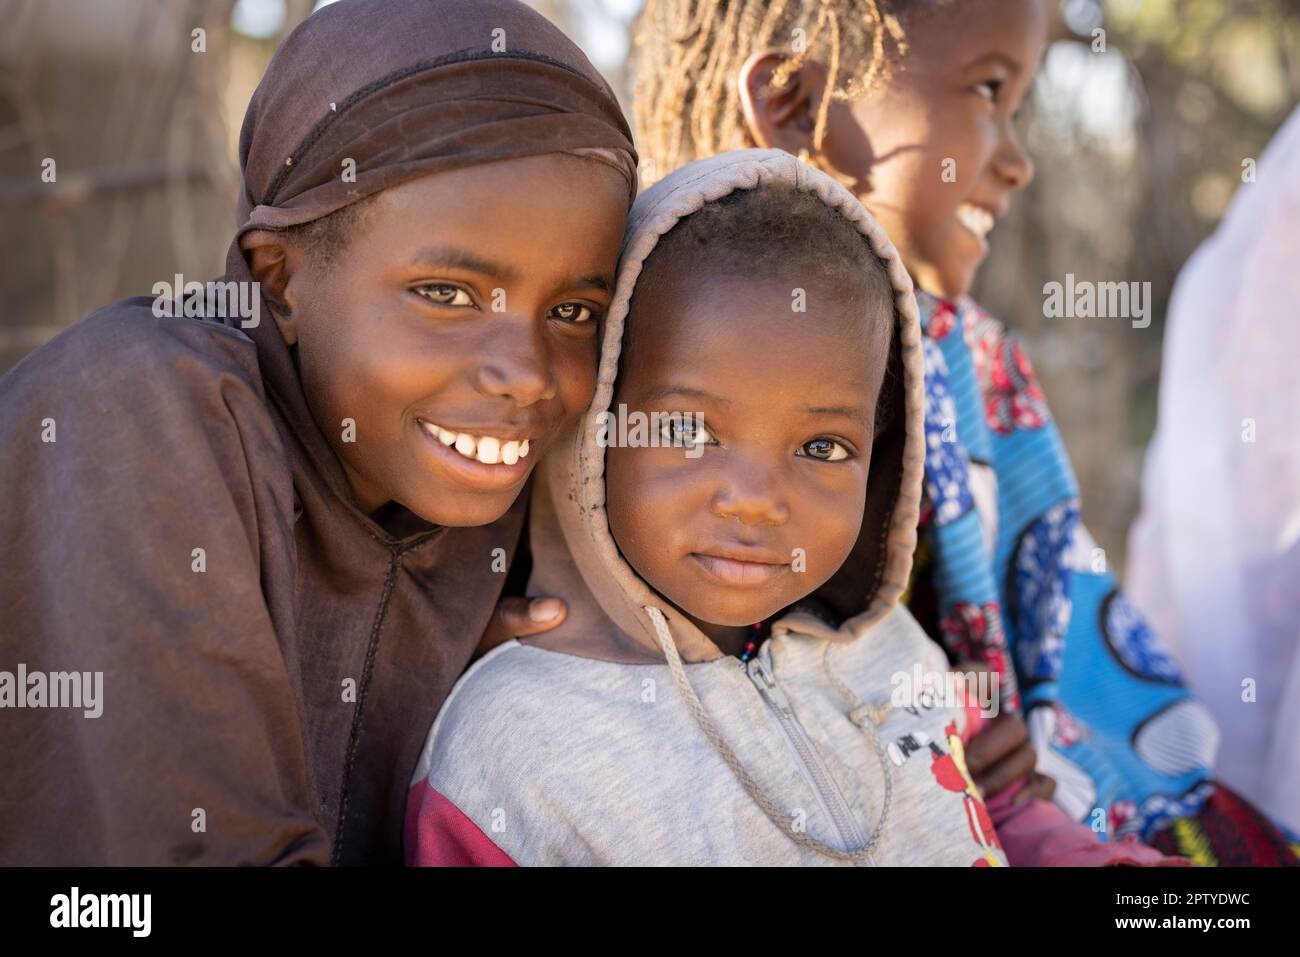 Smiling Fulani girl in Segou Region, Mali, West Africa. 2022 Mali drought and hunger crisis. Stock Photo